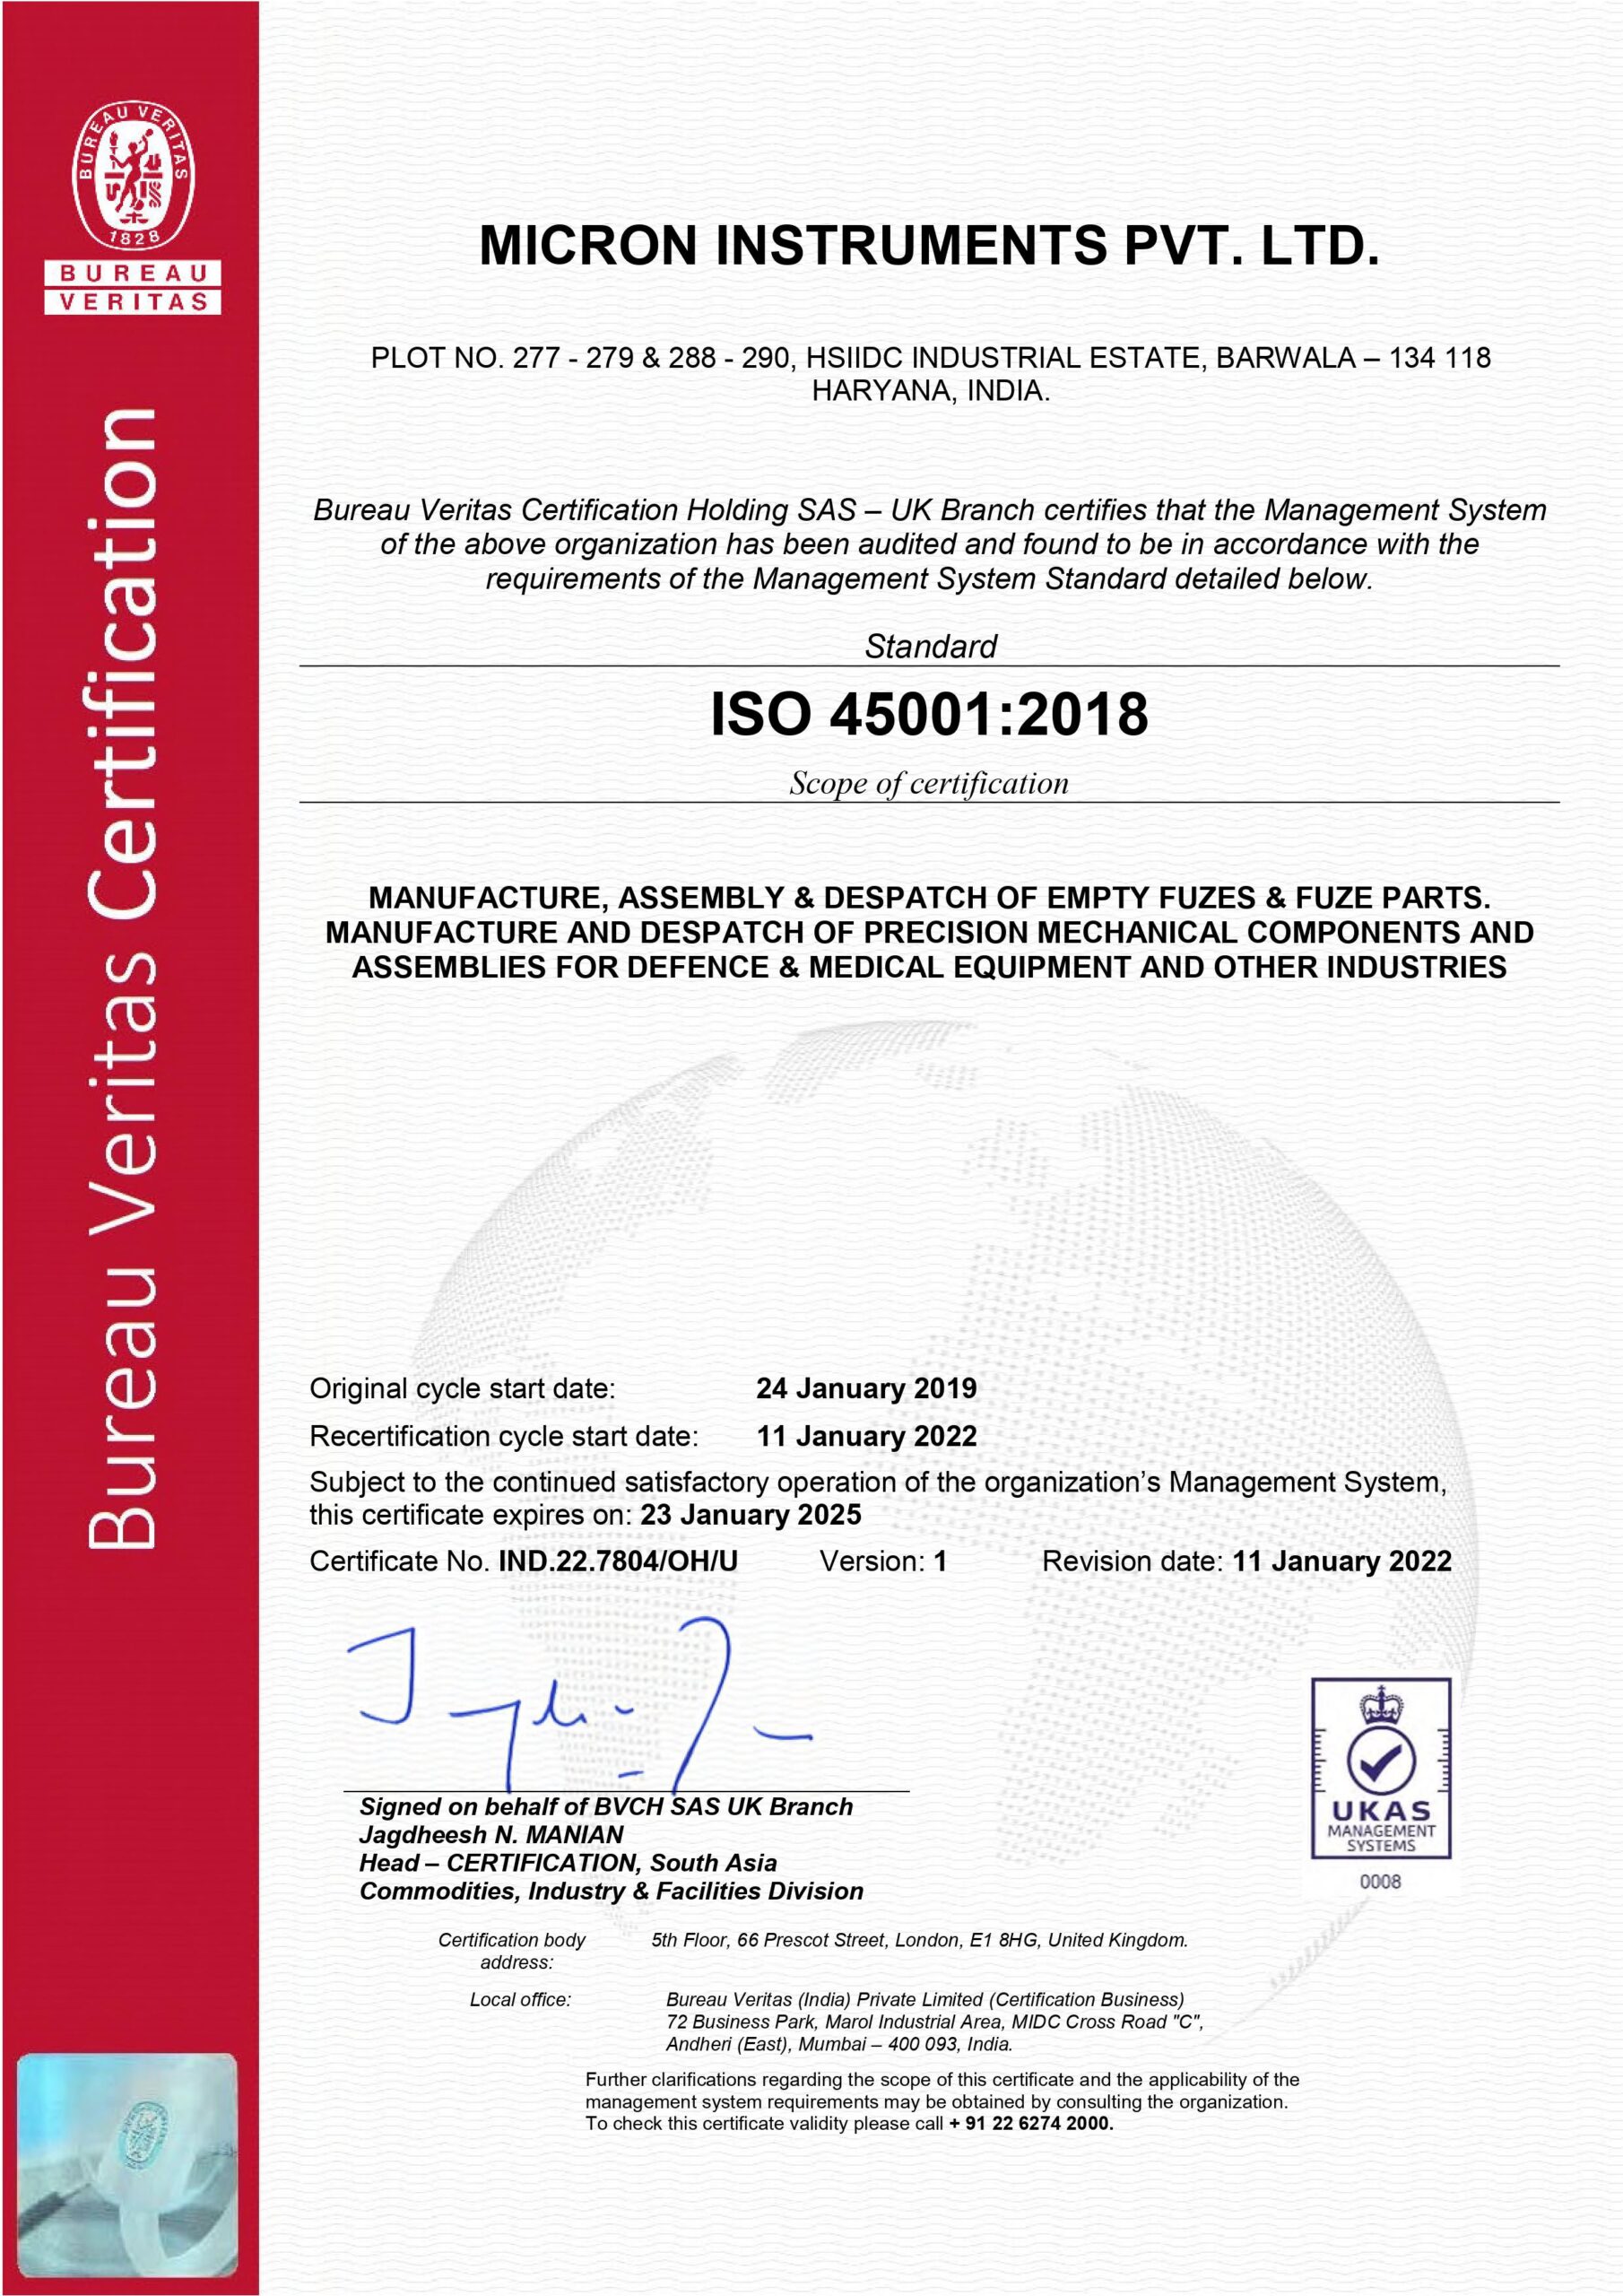 ISO 45001 CERTIFICATE